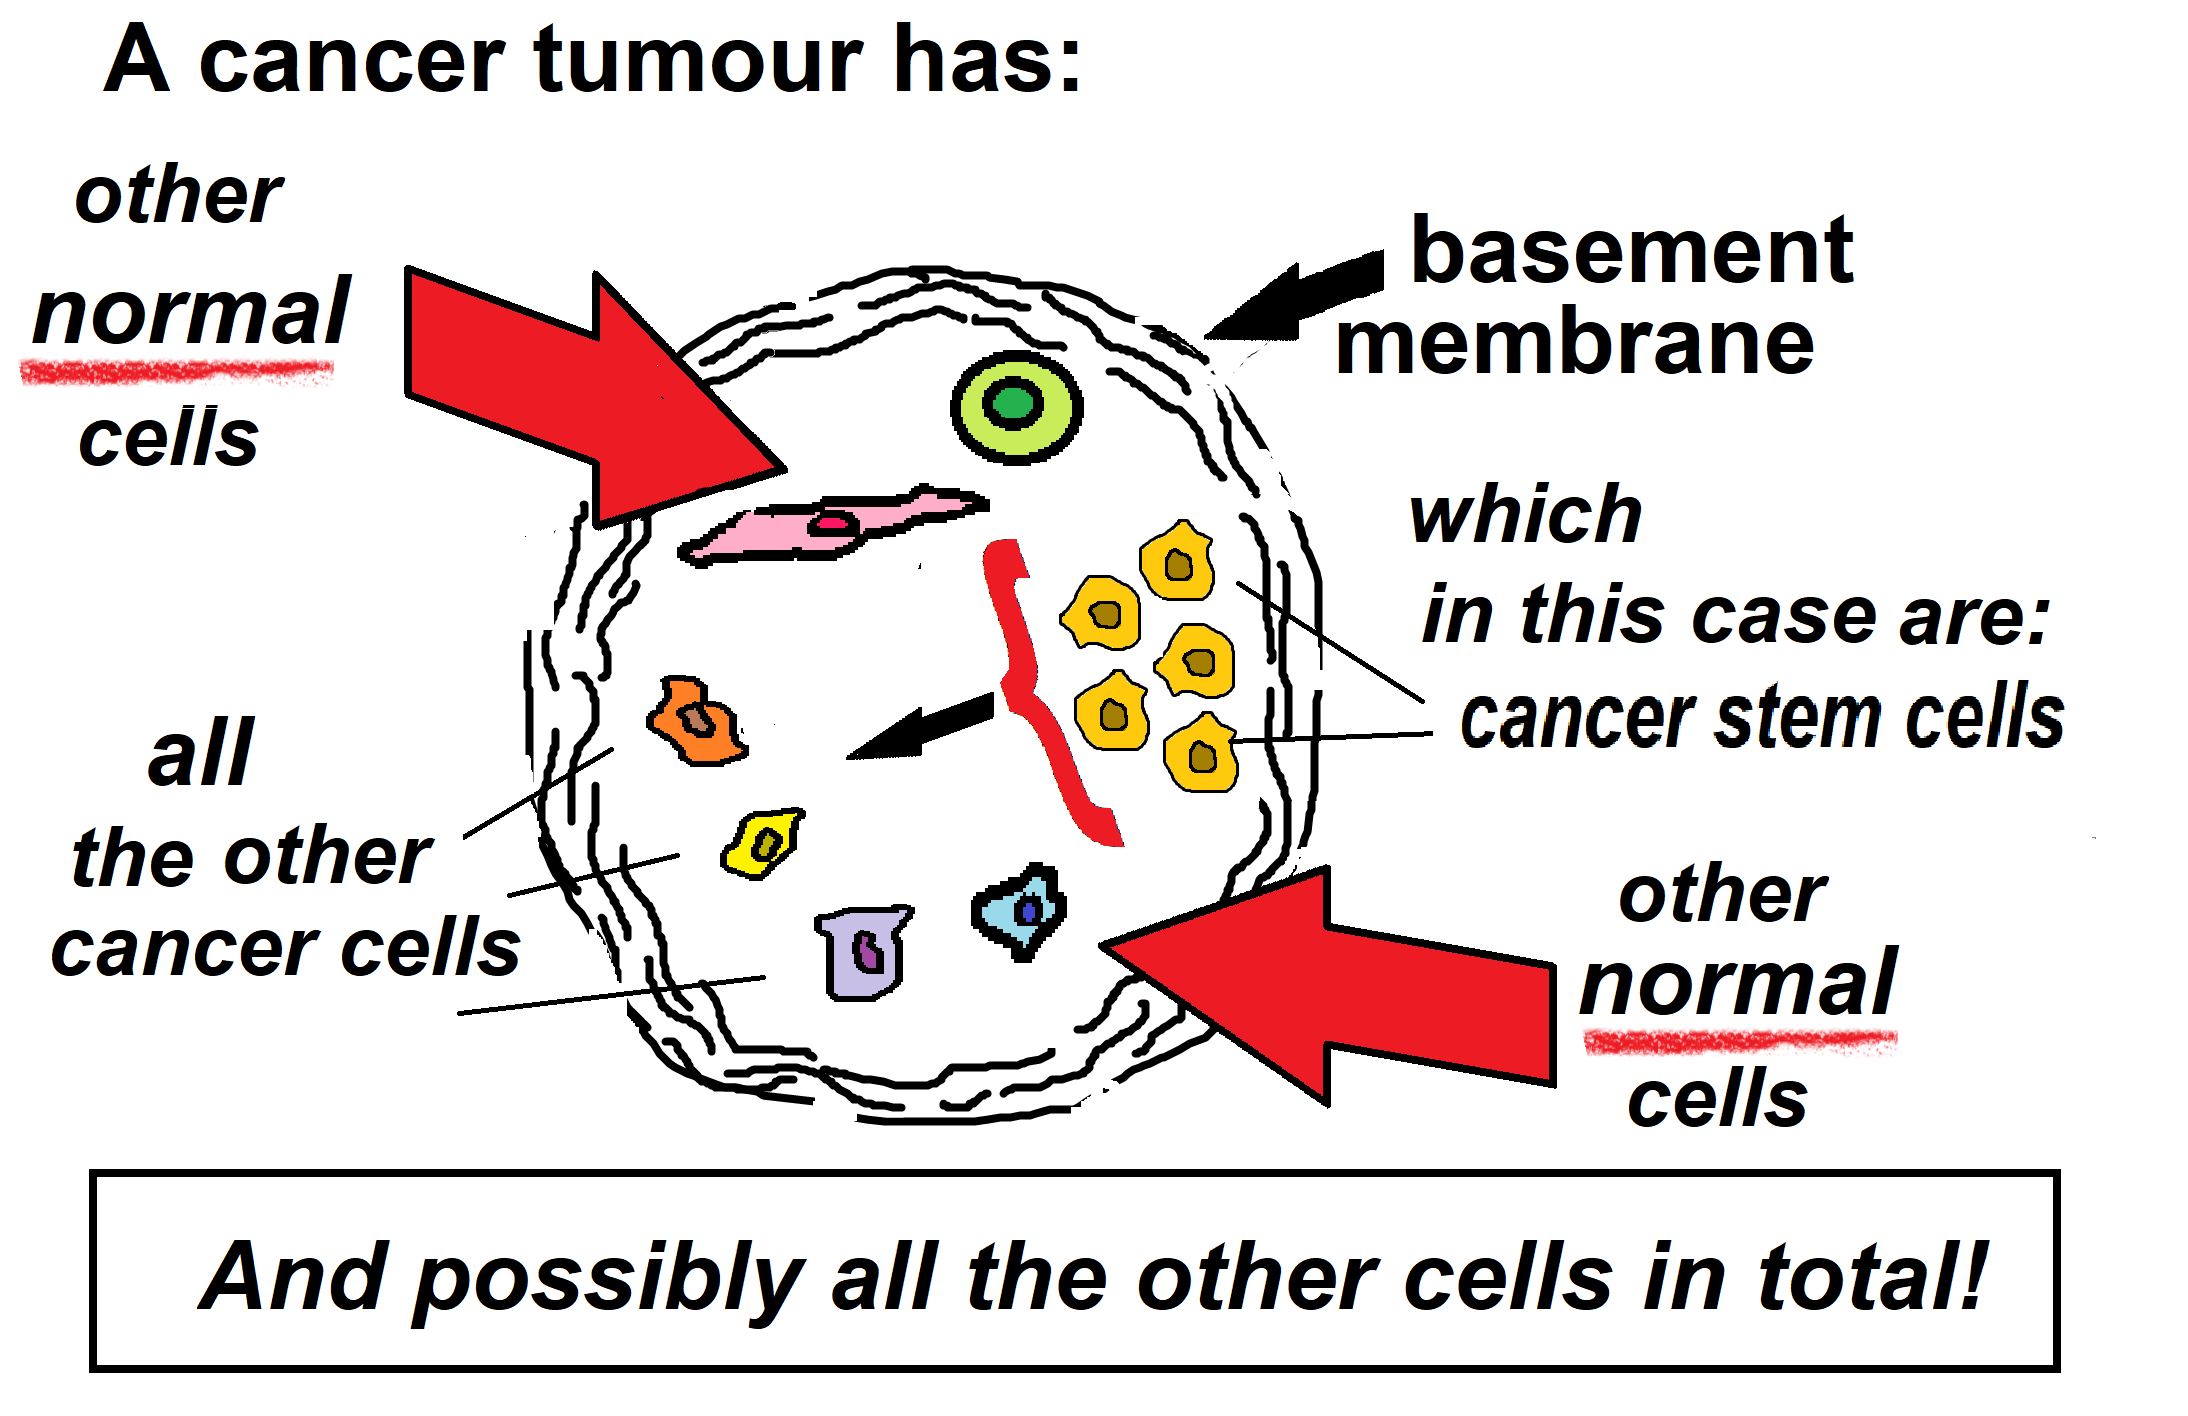 A cancer tumour has other cancer cells2a andgjdd